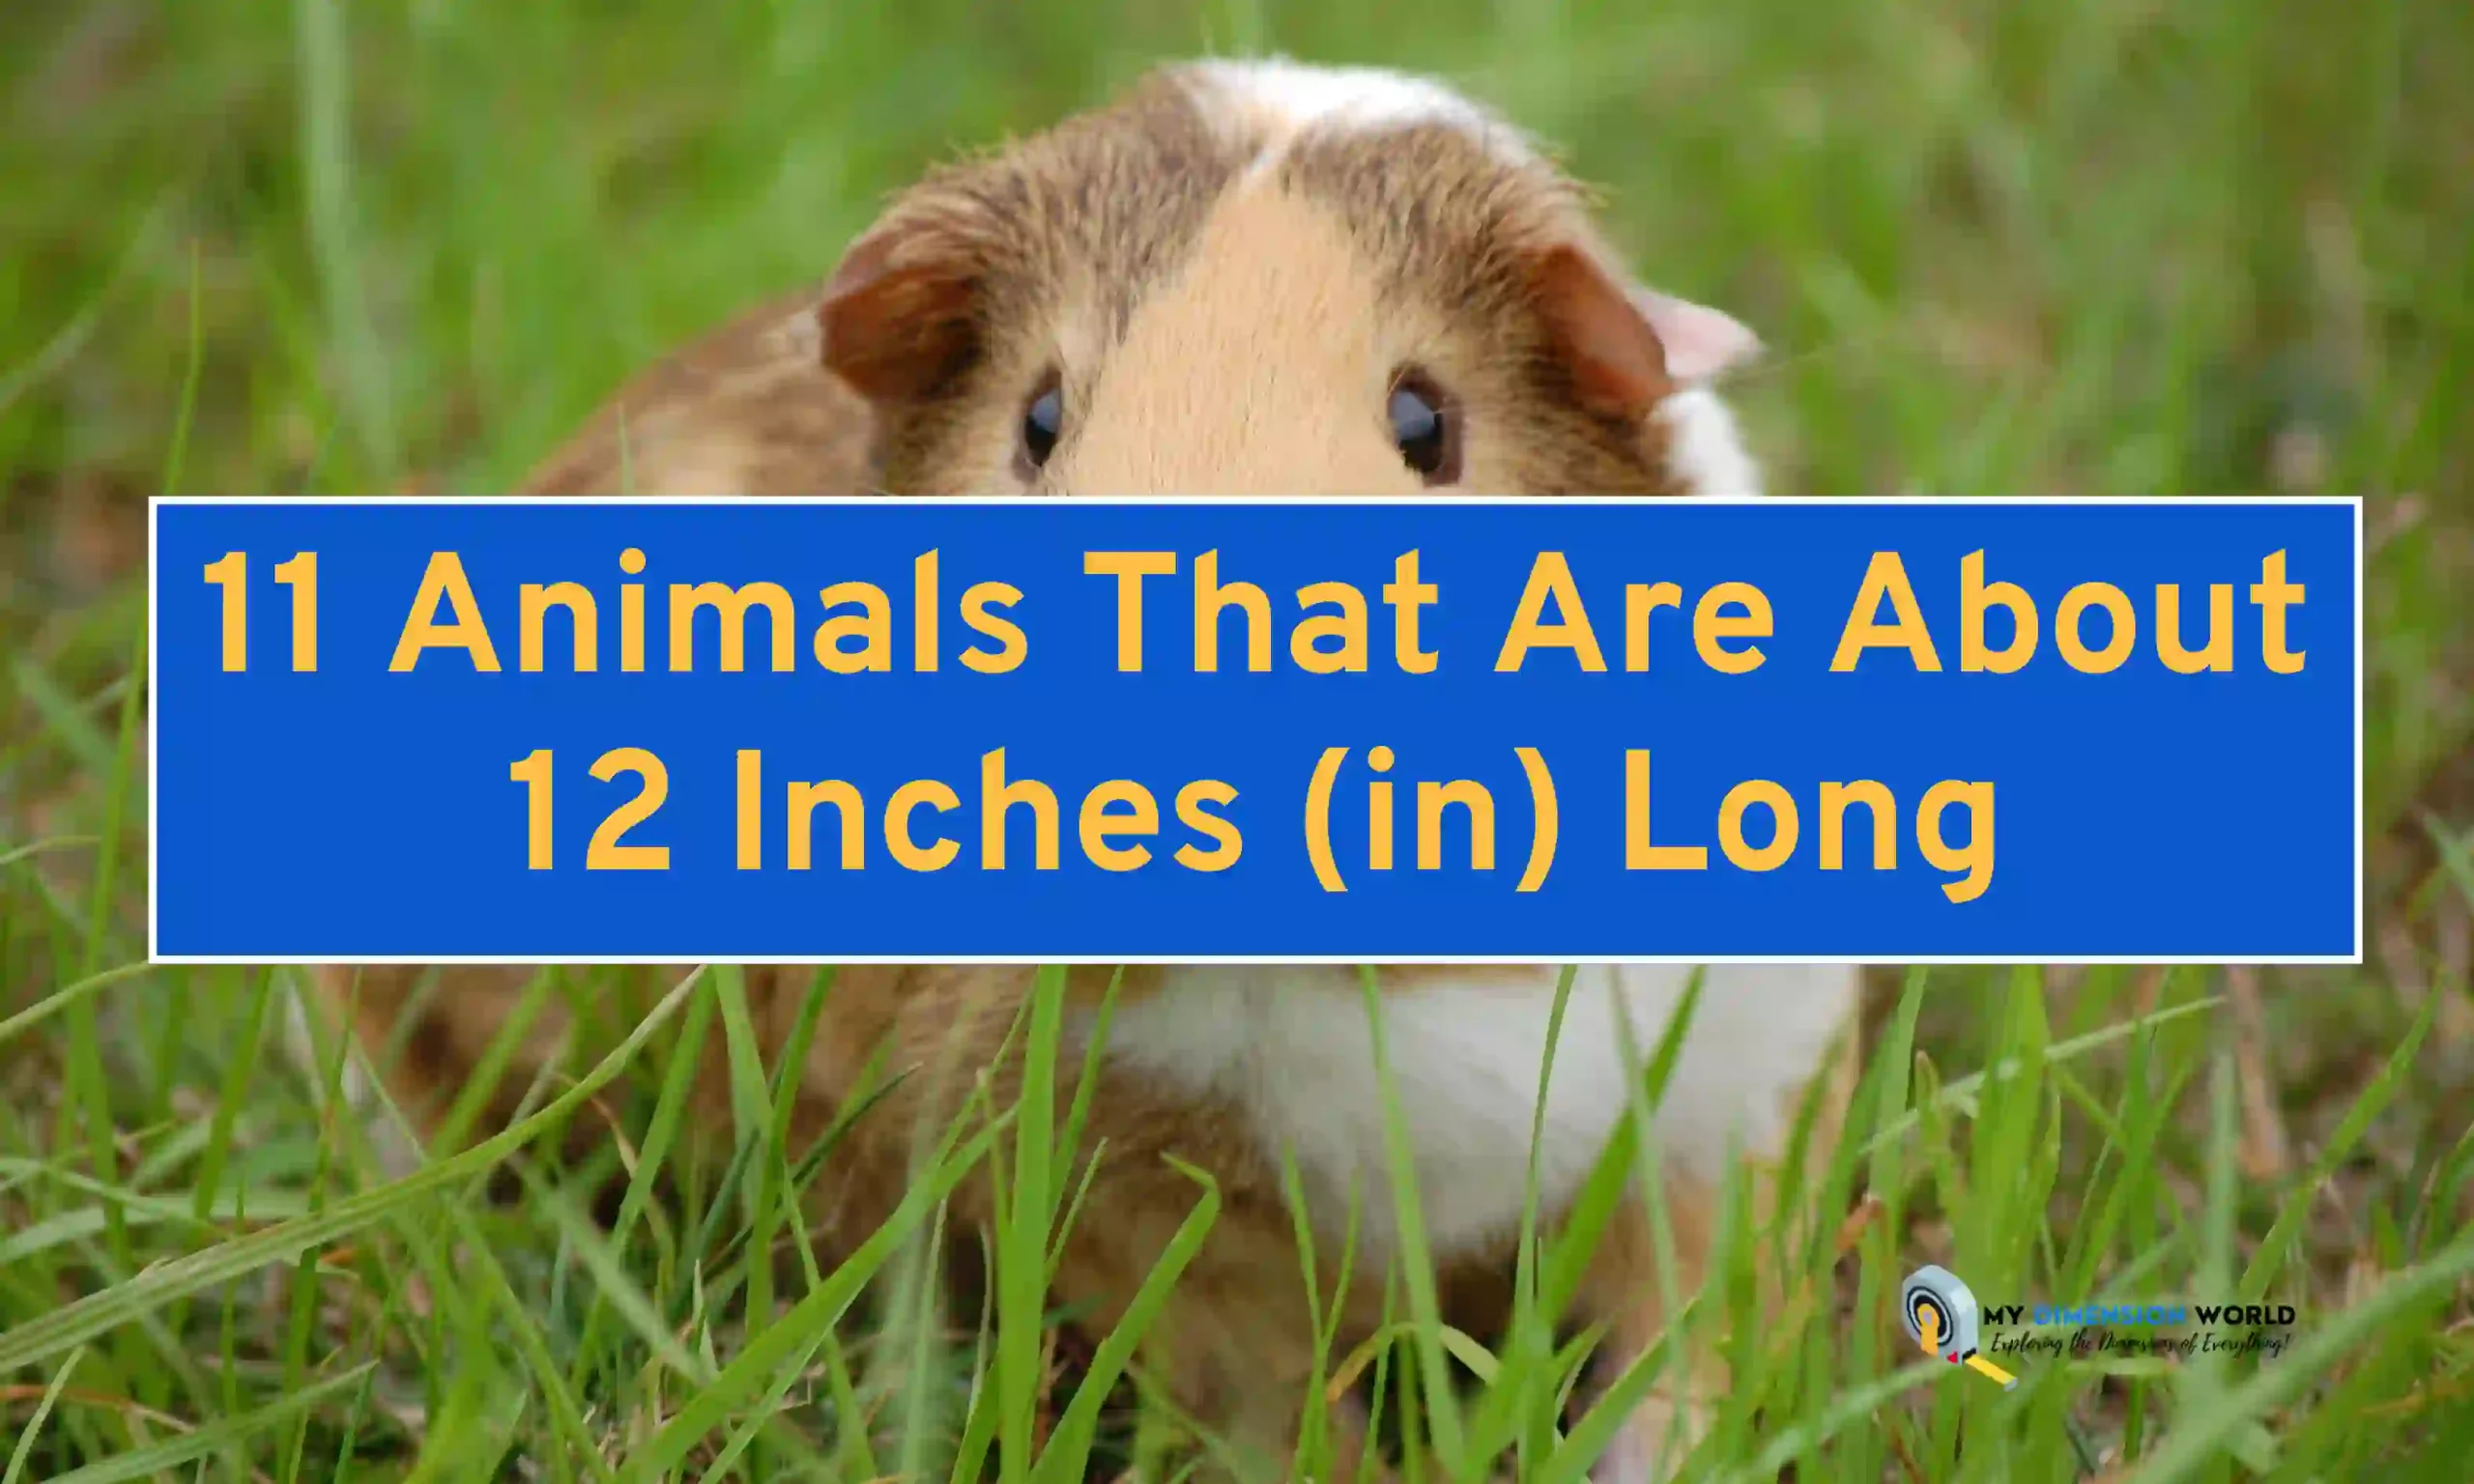 11 Animals That Are About 12 Inches (in) Long